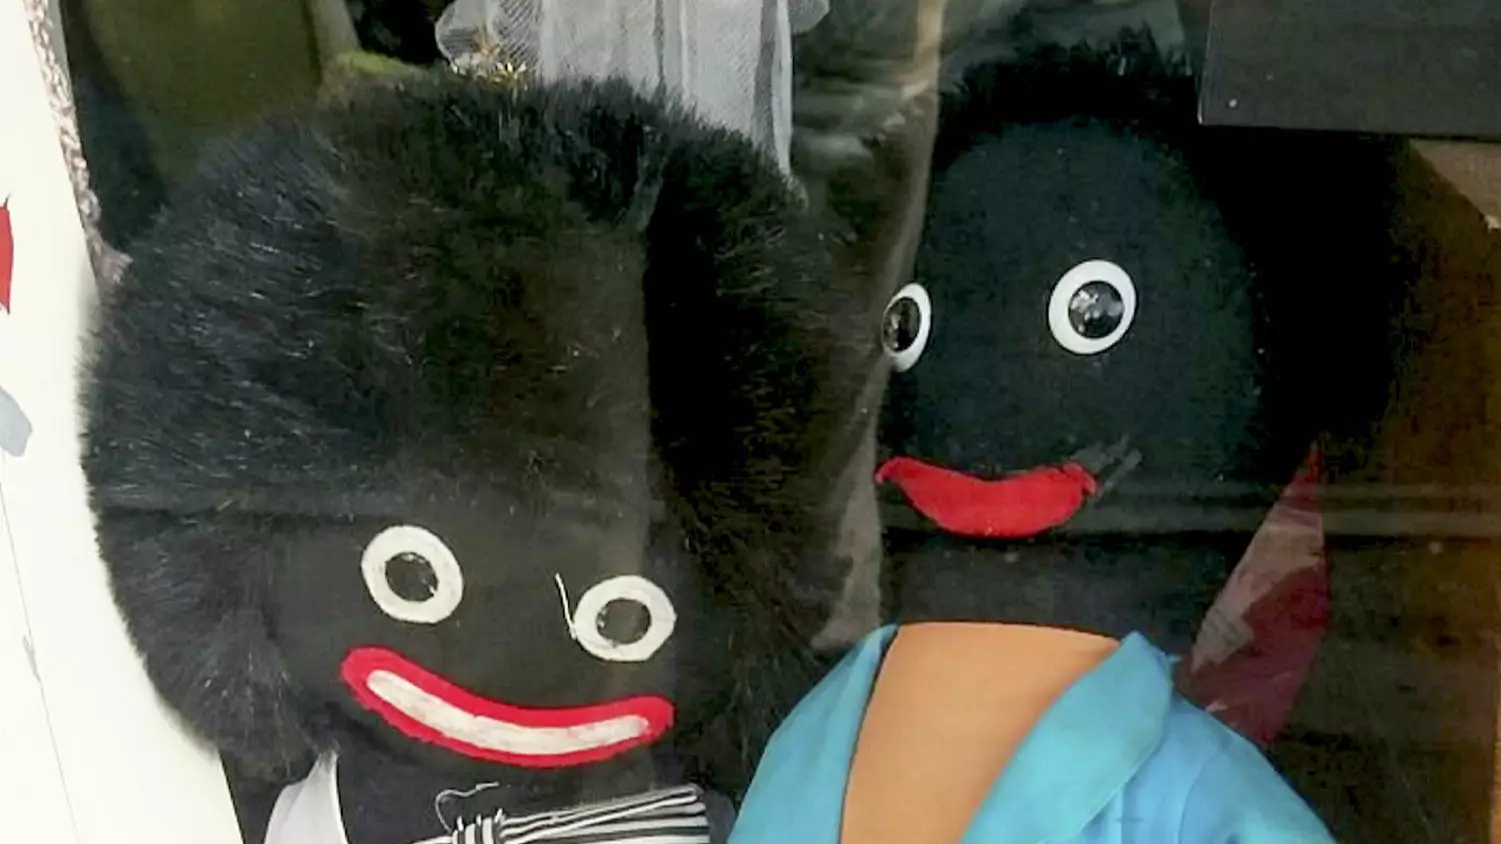 RSPCA Charity Shop Blasted For Selling Golliwogs 